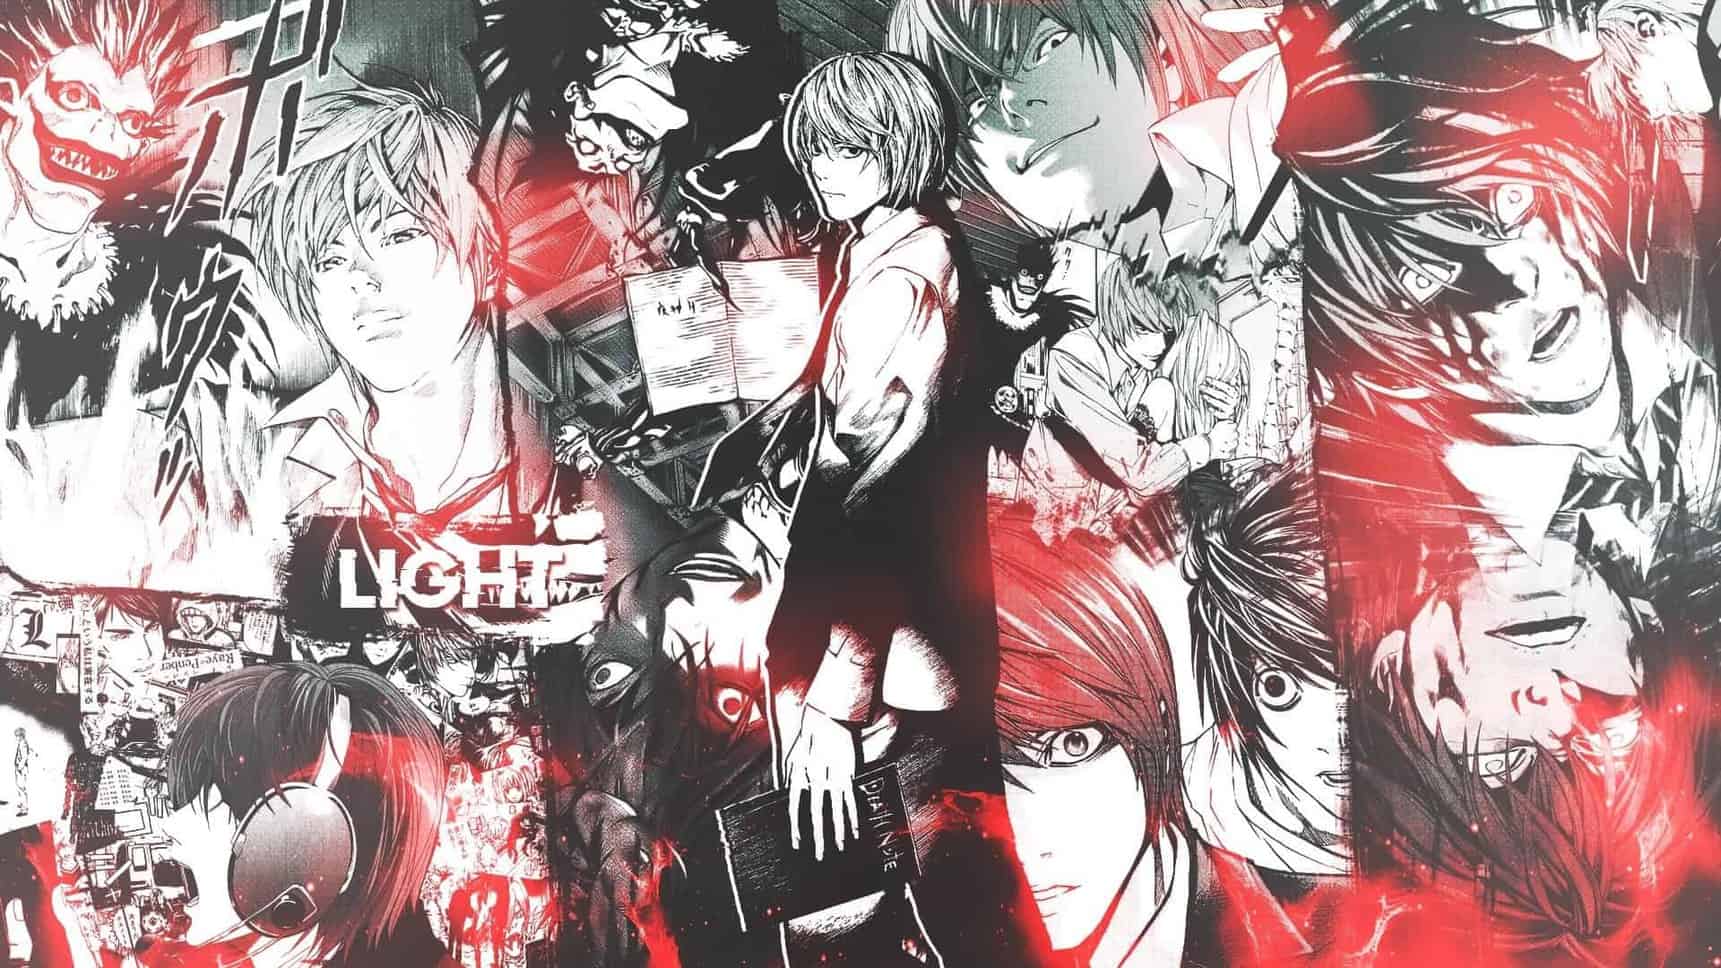 Death Note Quotes